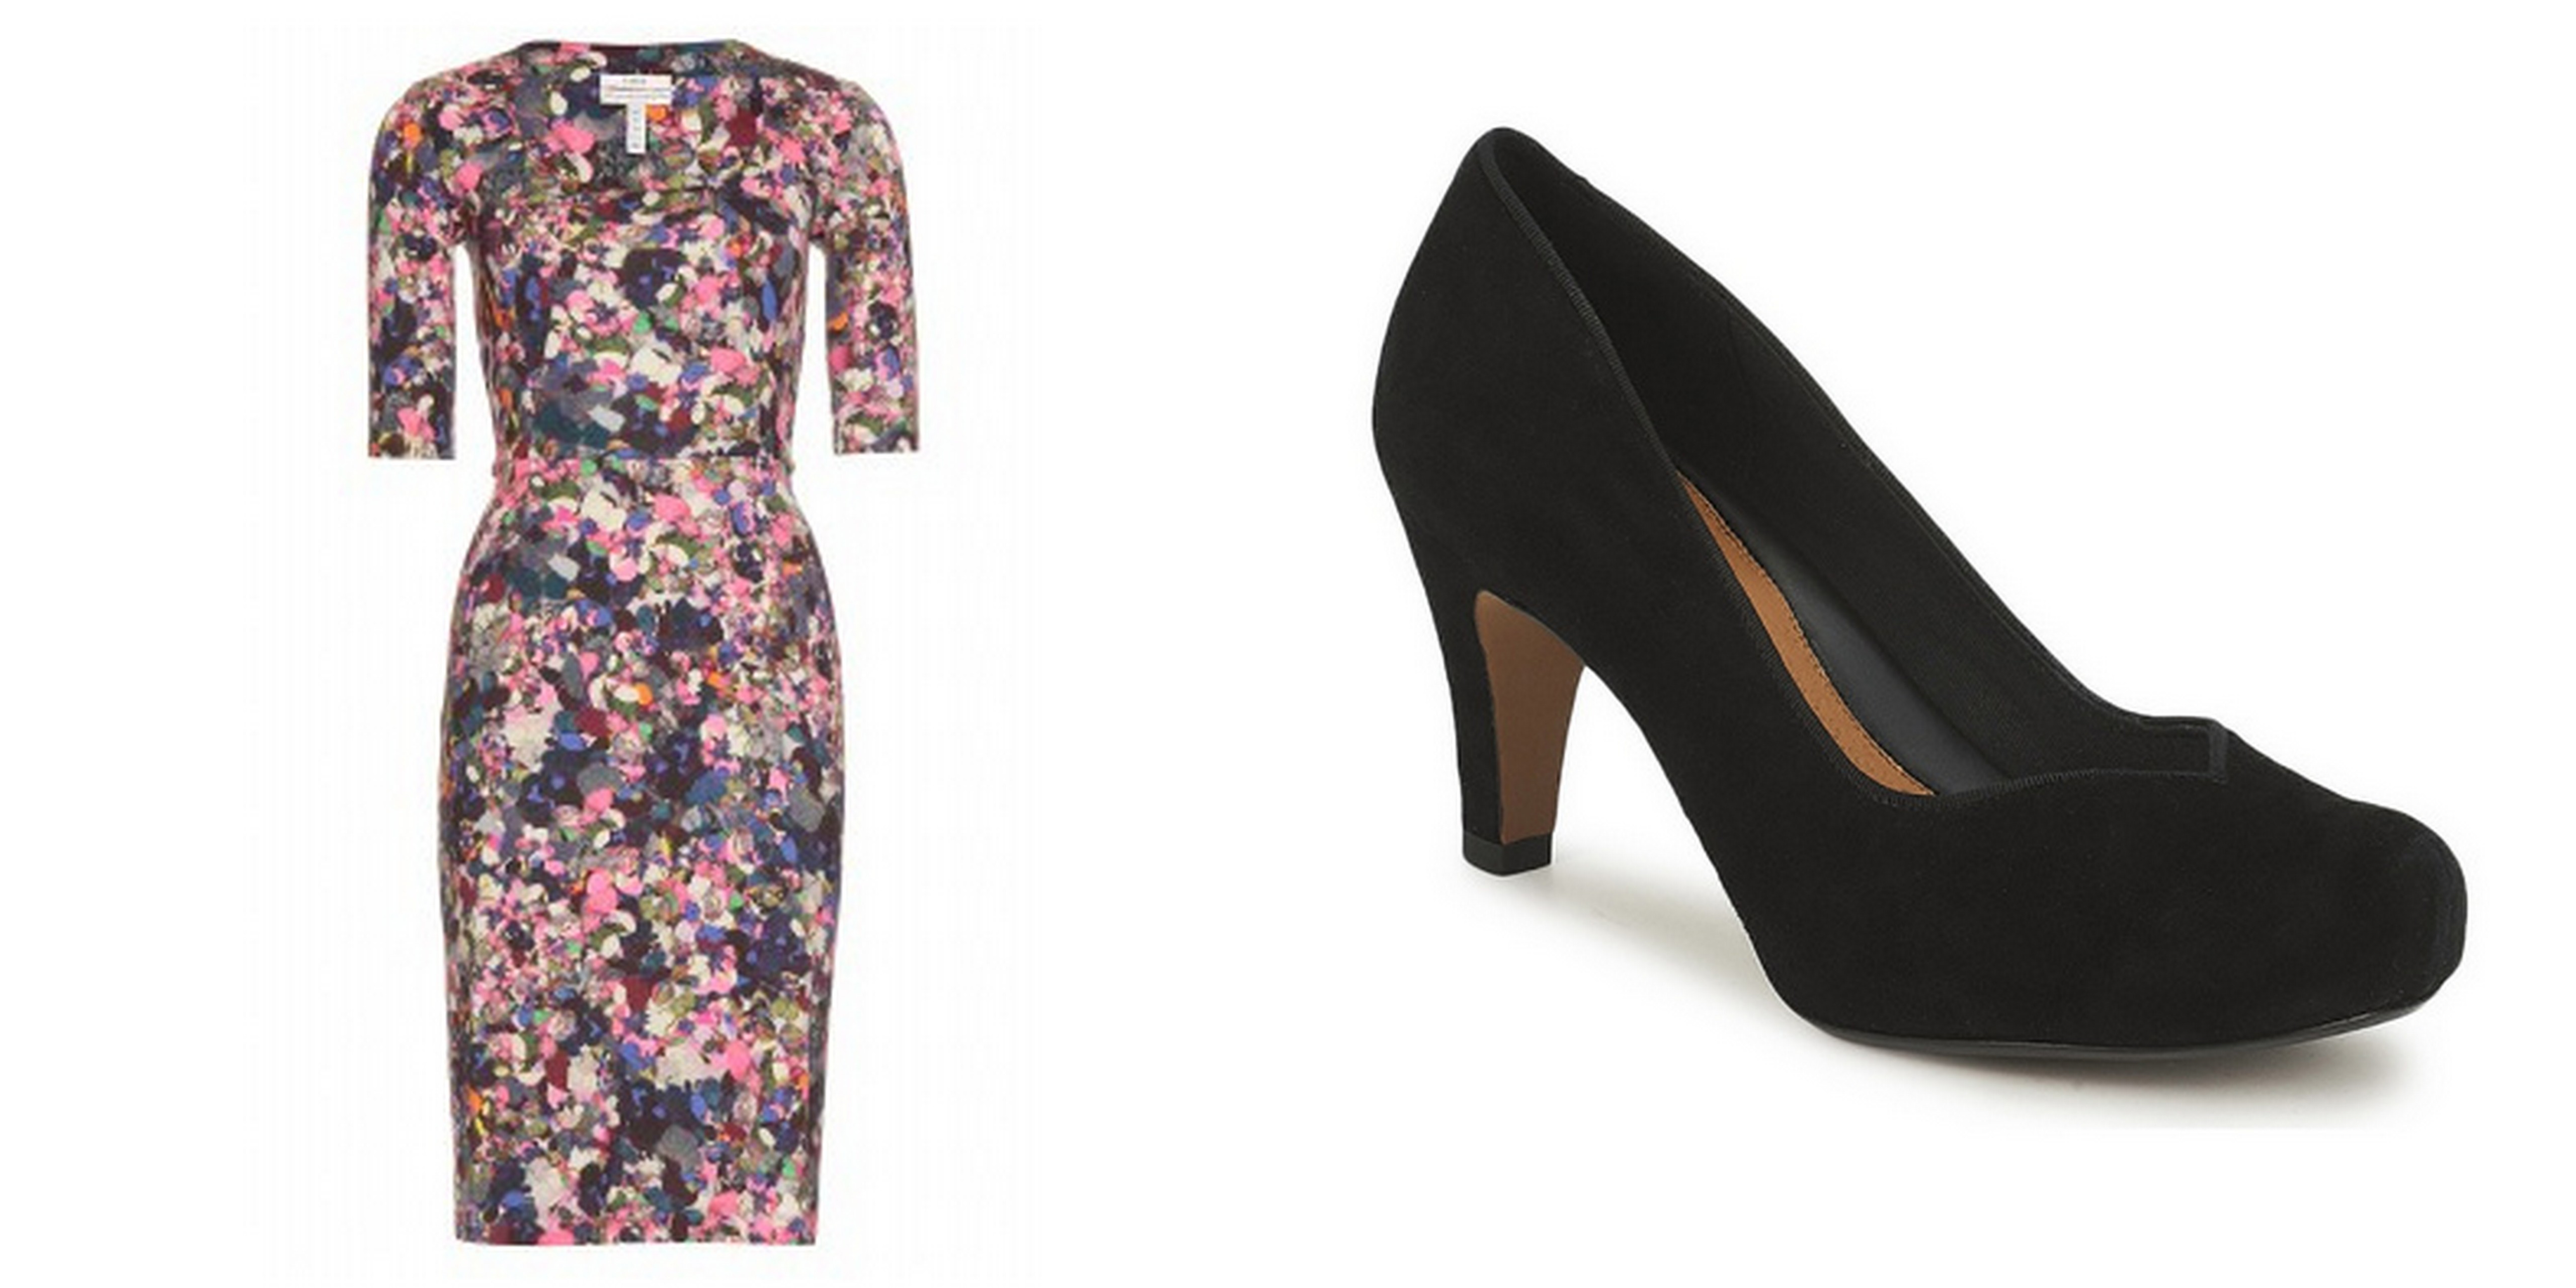 Erdem Dress and Clarks Shoes